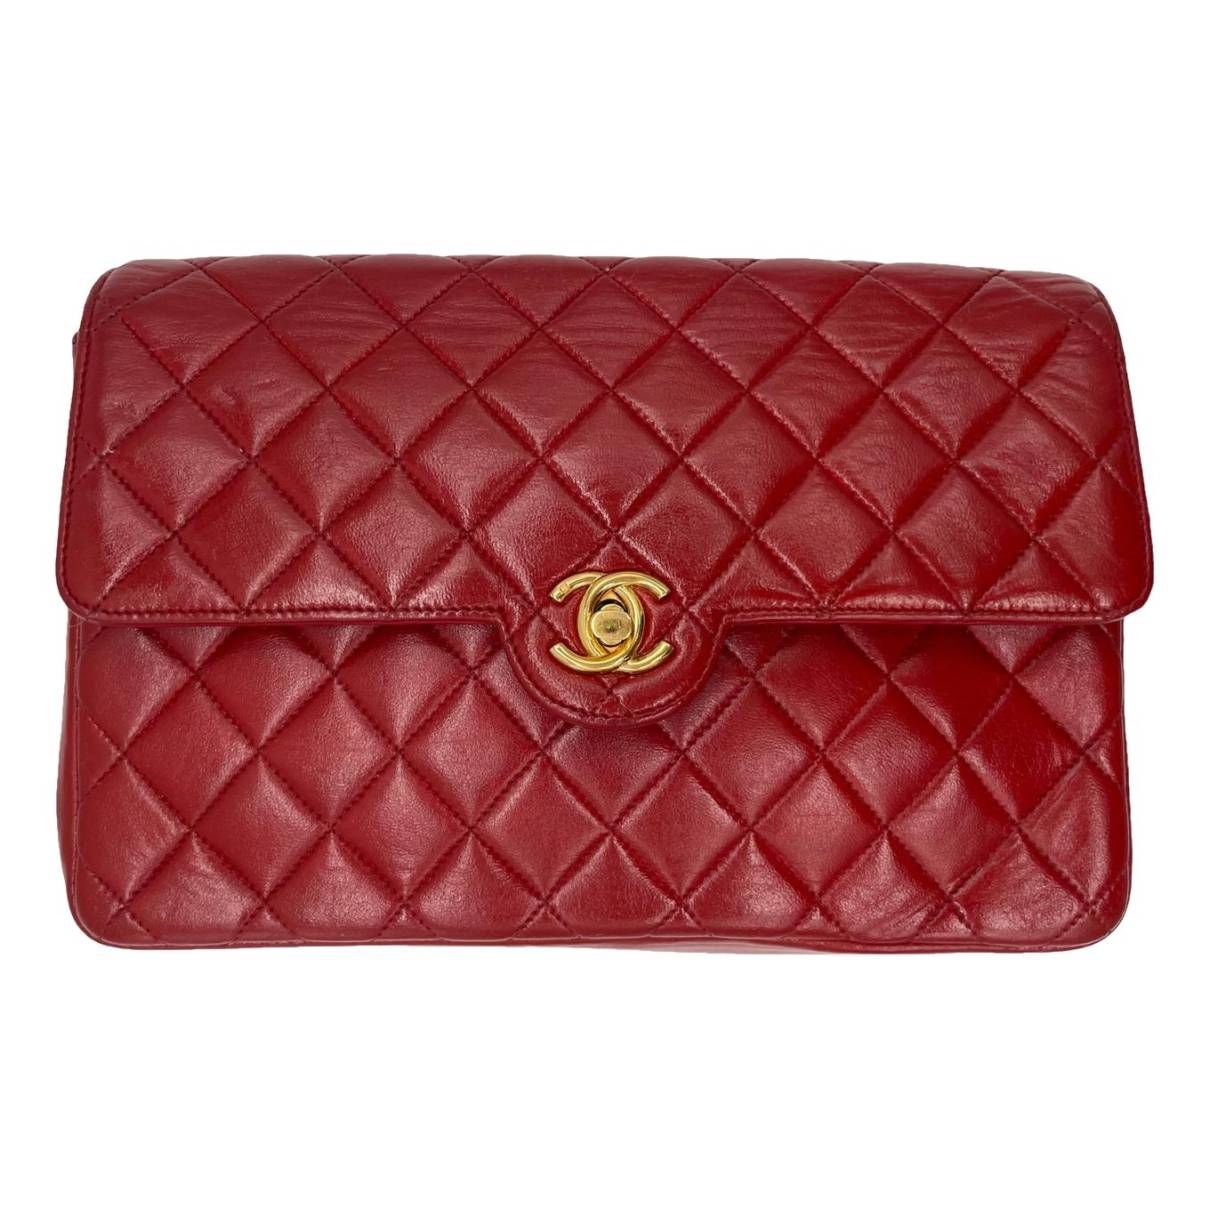 Chanel Vintage Classic Single Flap Bag Micro Quilted Velvet Medium Brown